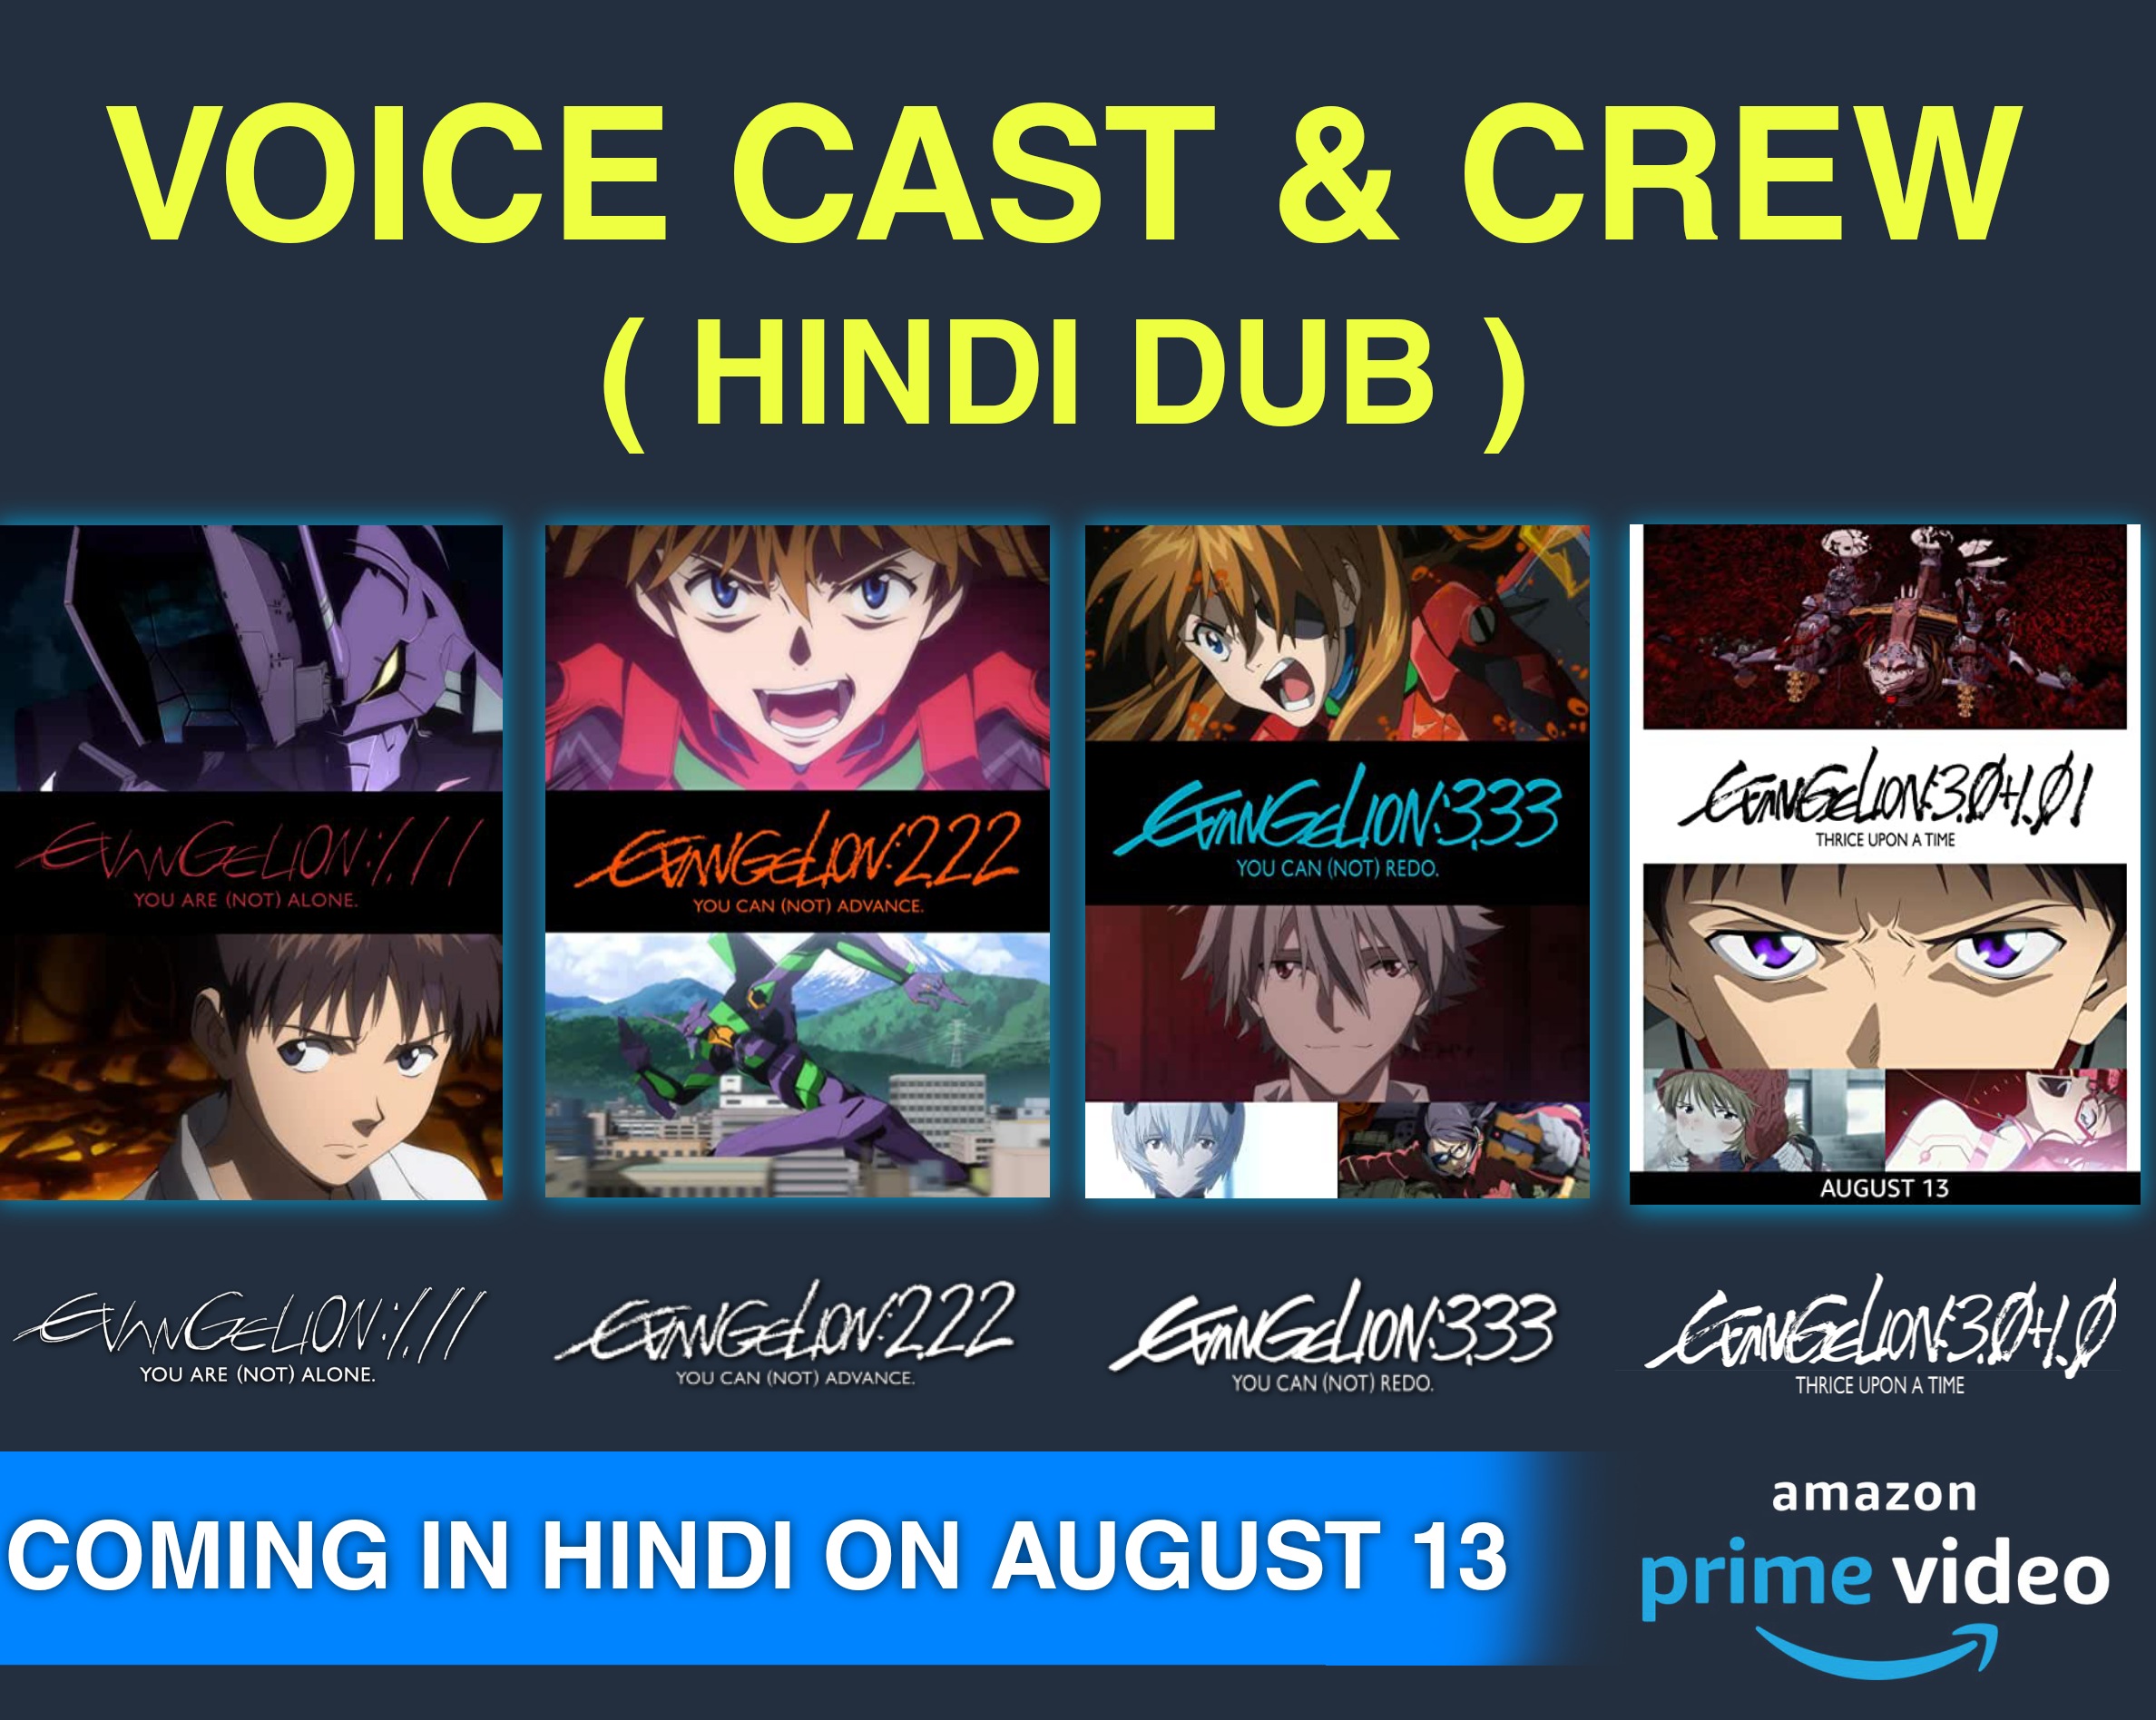 Amazon Prime Video Reveals Hindi Voice Cast & Staff Members For Rebuild of Evangelion Anime Film Series A Head of its Release on August 13